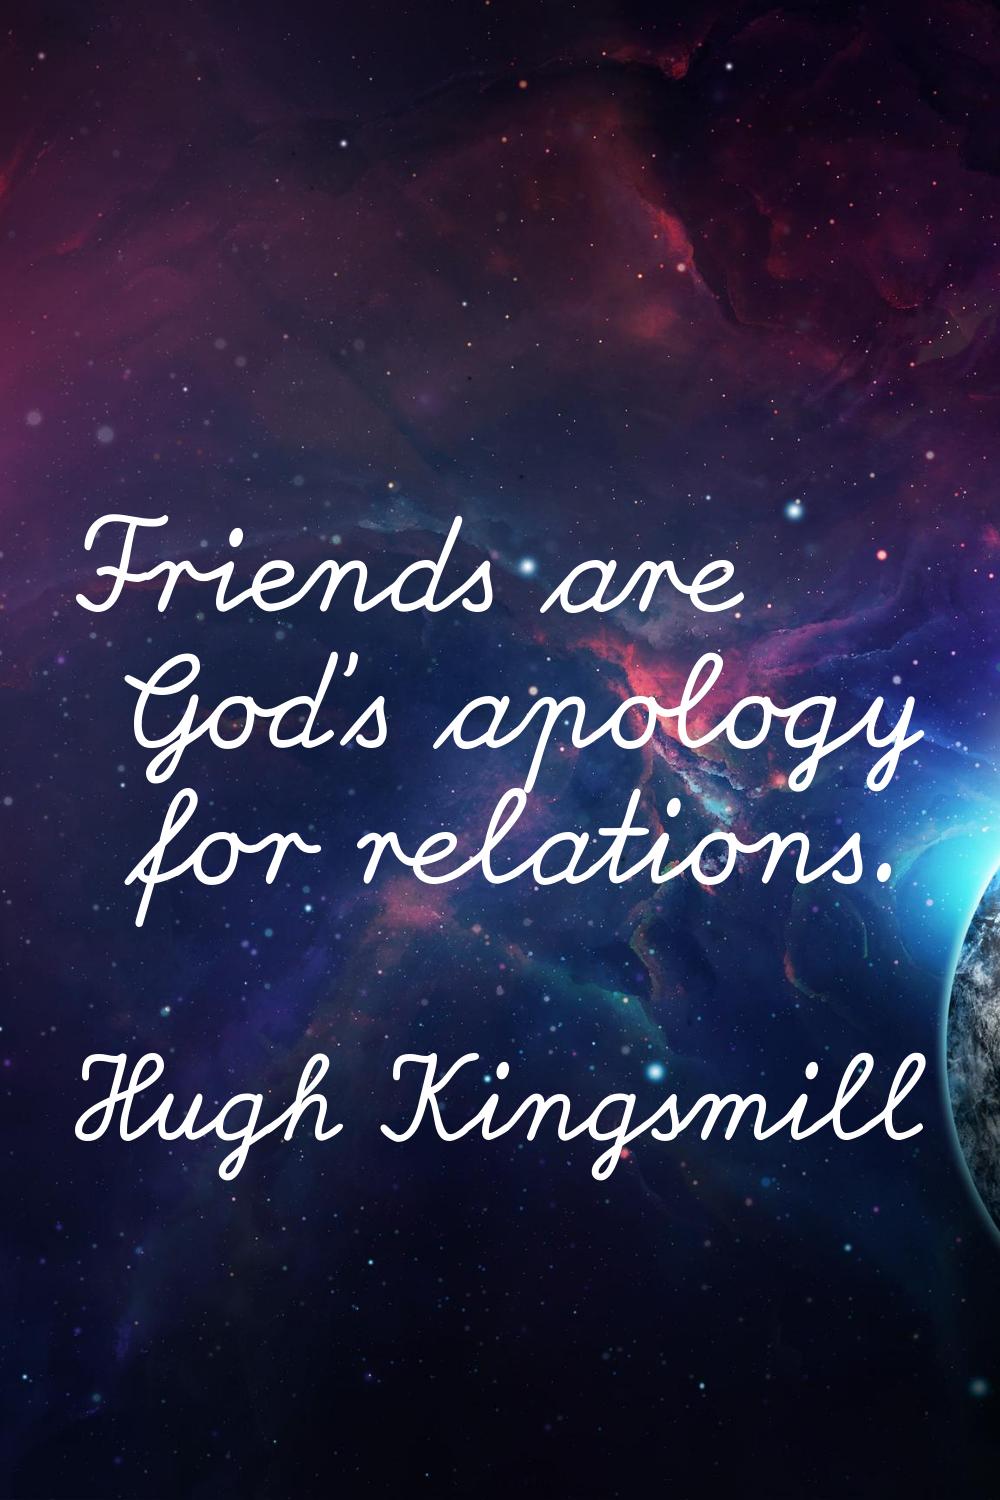 Friends are God's apology for relations.